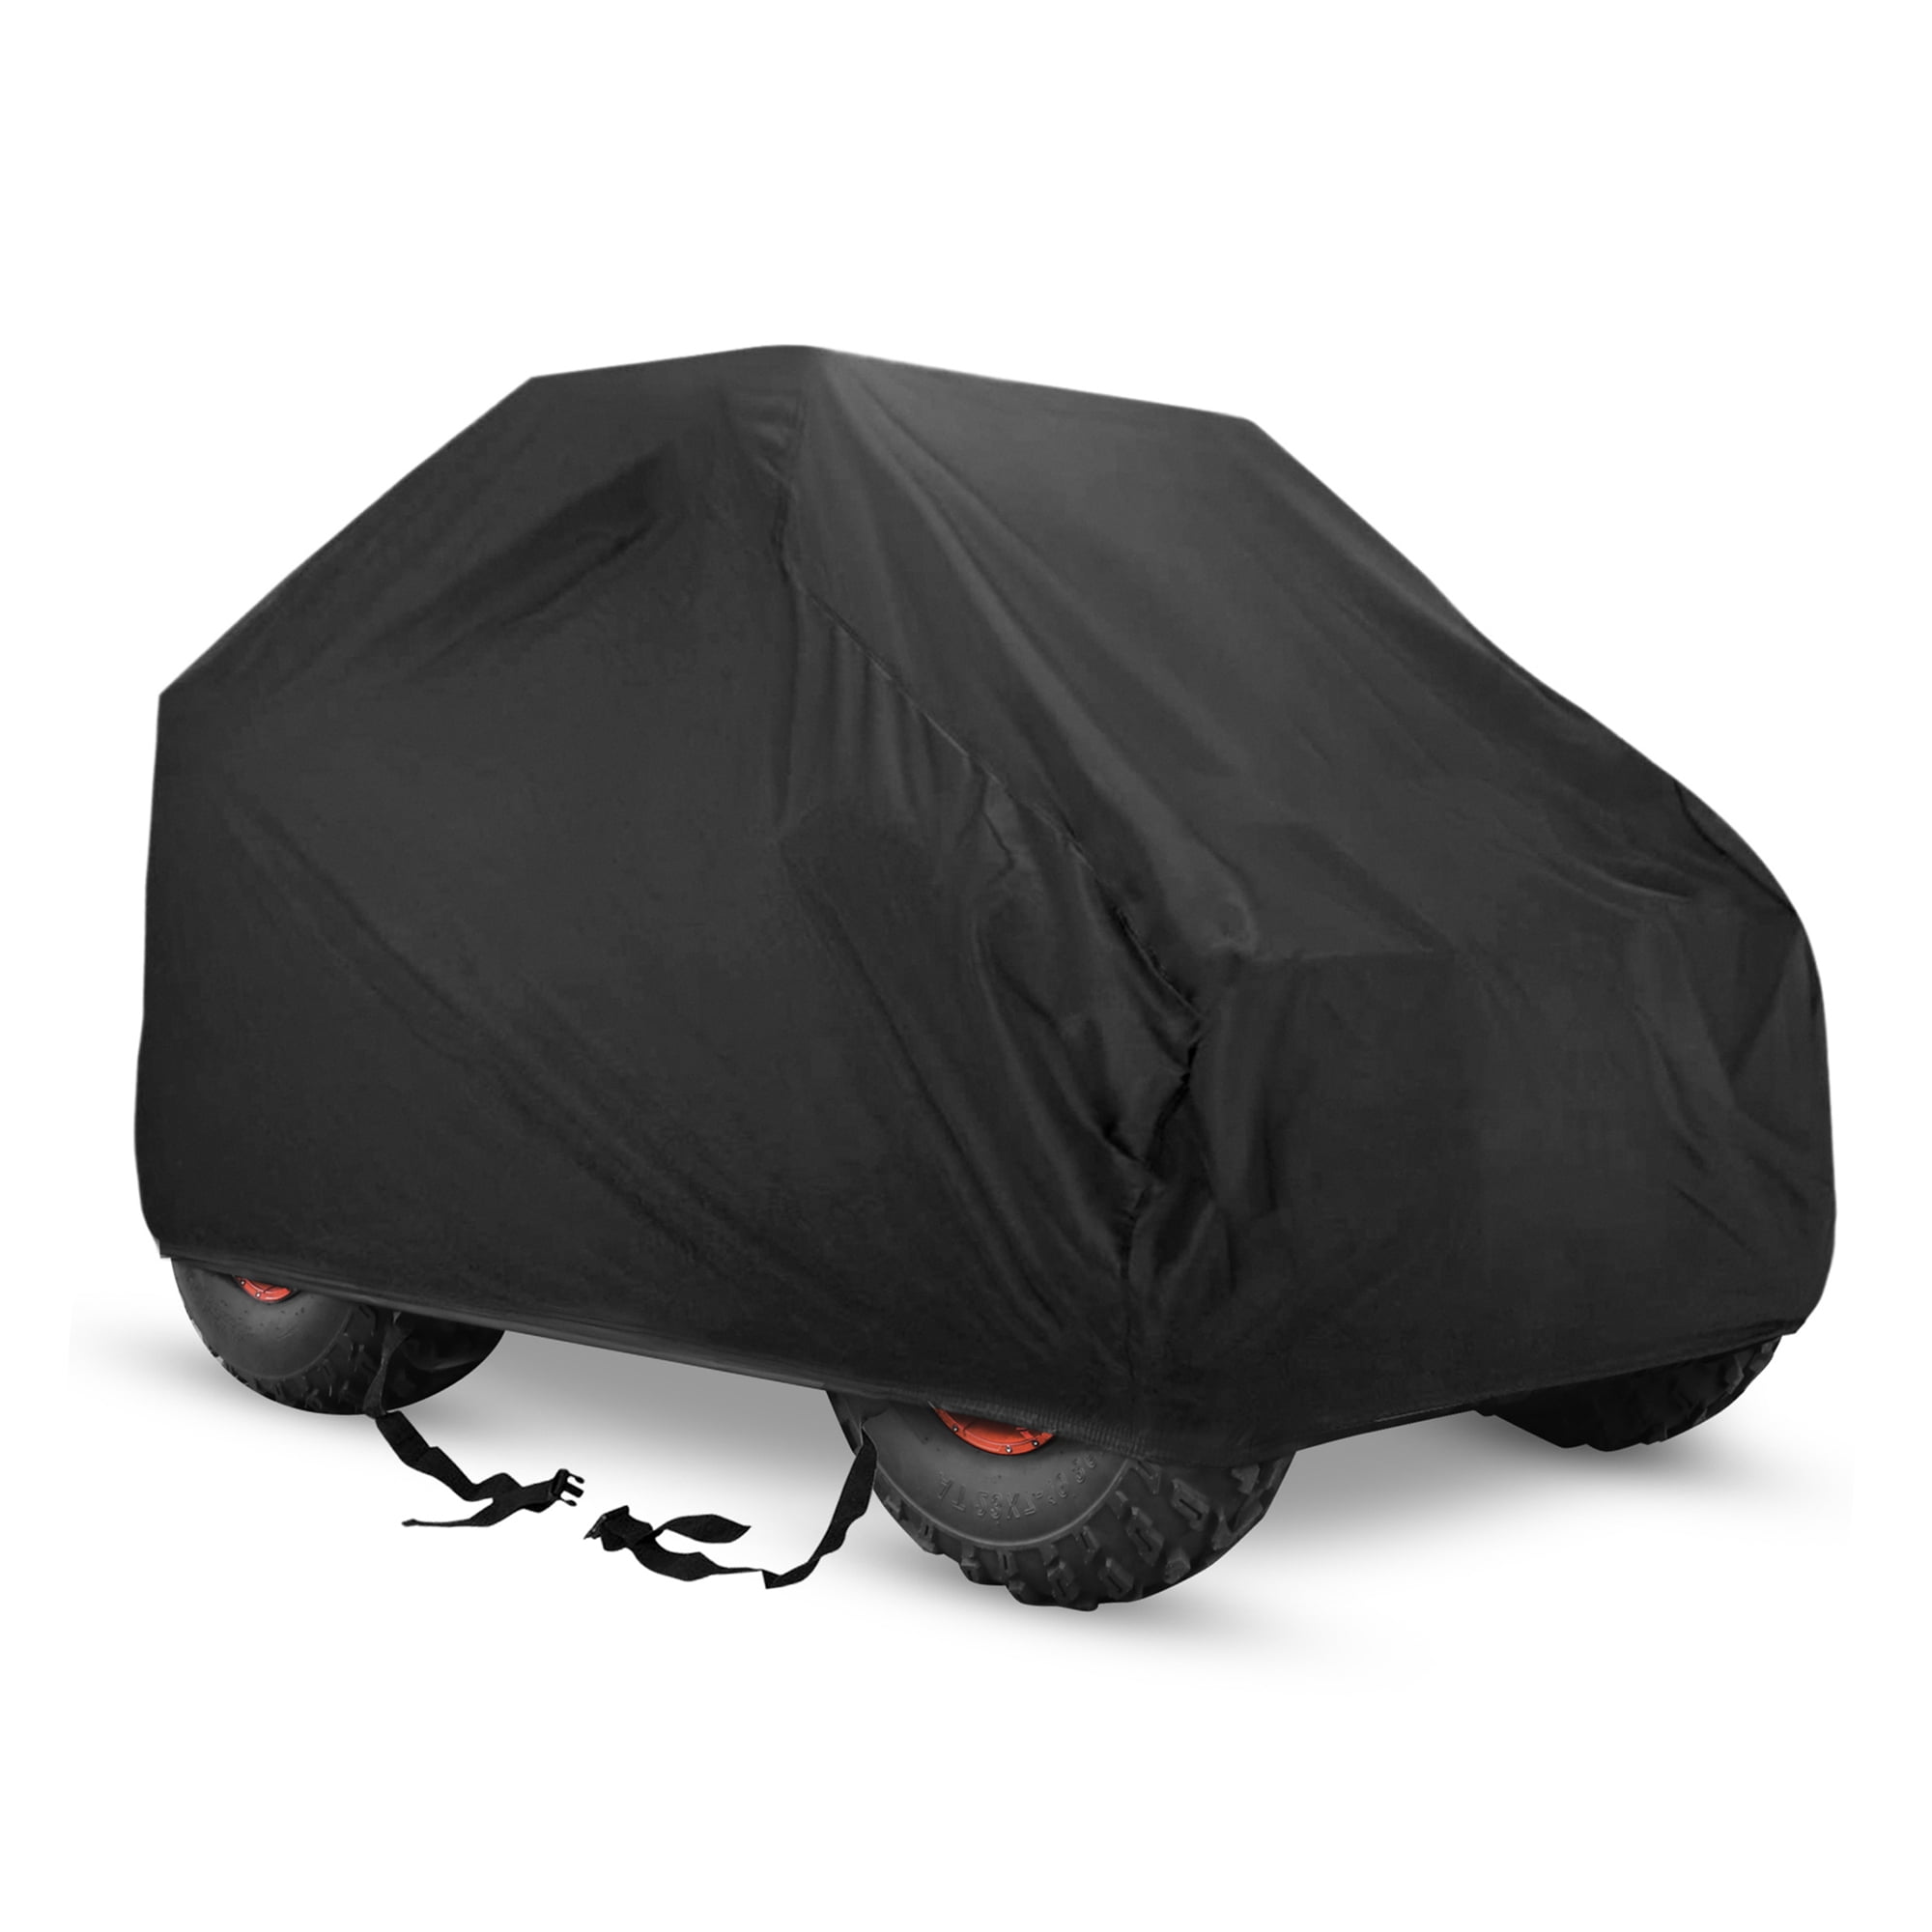 HEAVY DUTY WATERPROOF SUPERIOR UTV SIDE BY SIDE COVER COVERS FITS UP TO 120L W/ROLL CAGE BLACK COLOR ATV COVER RHINO RANGER MULE GATOR PROWLER YAMAHA PROWLER RANCHER FOREMAN FOURTRAX RECON 4x4 